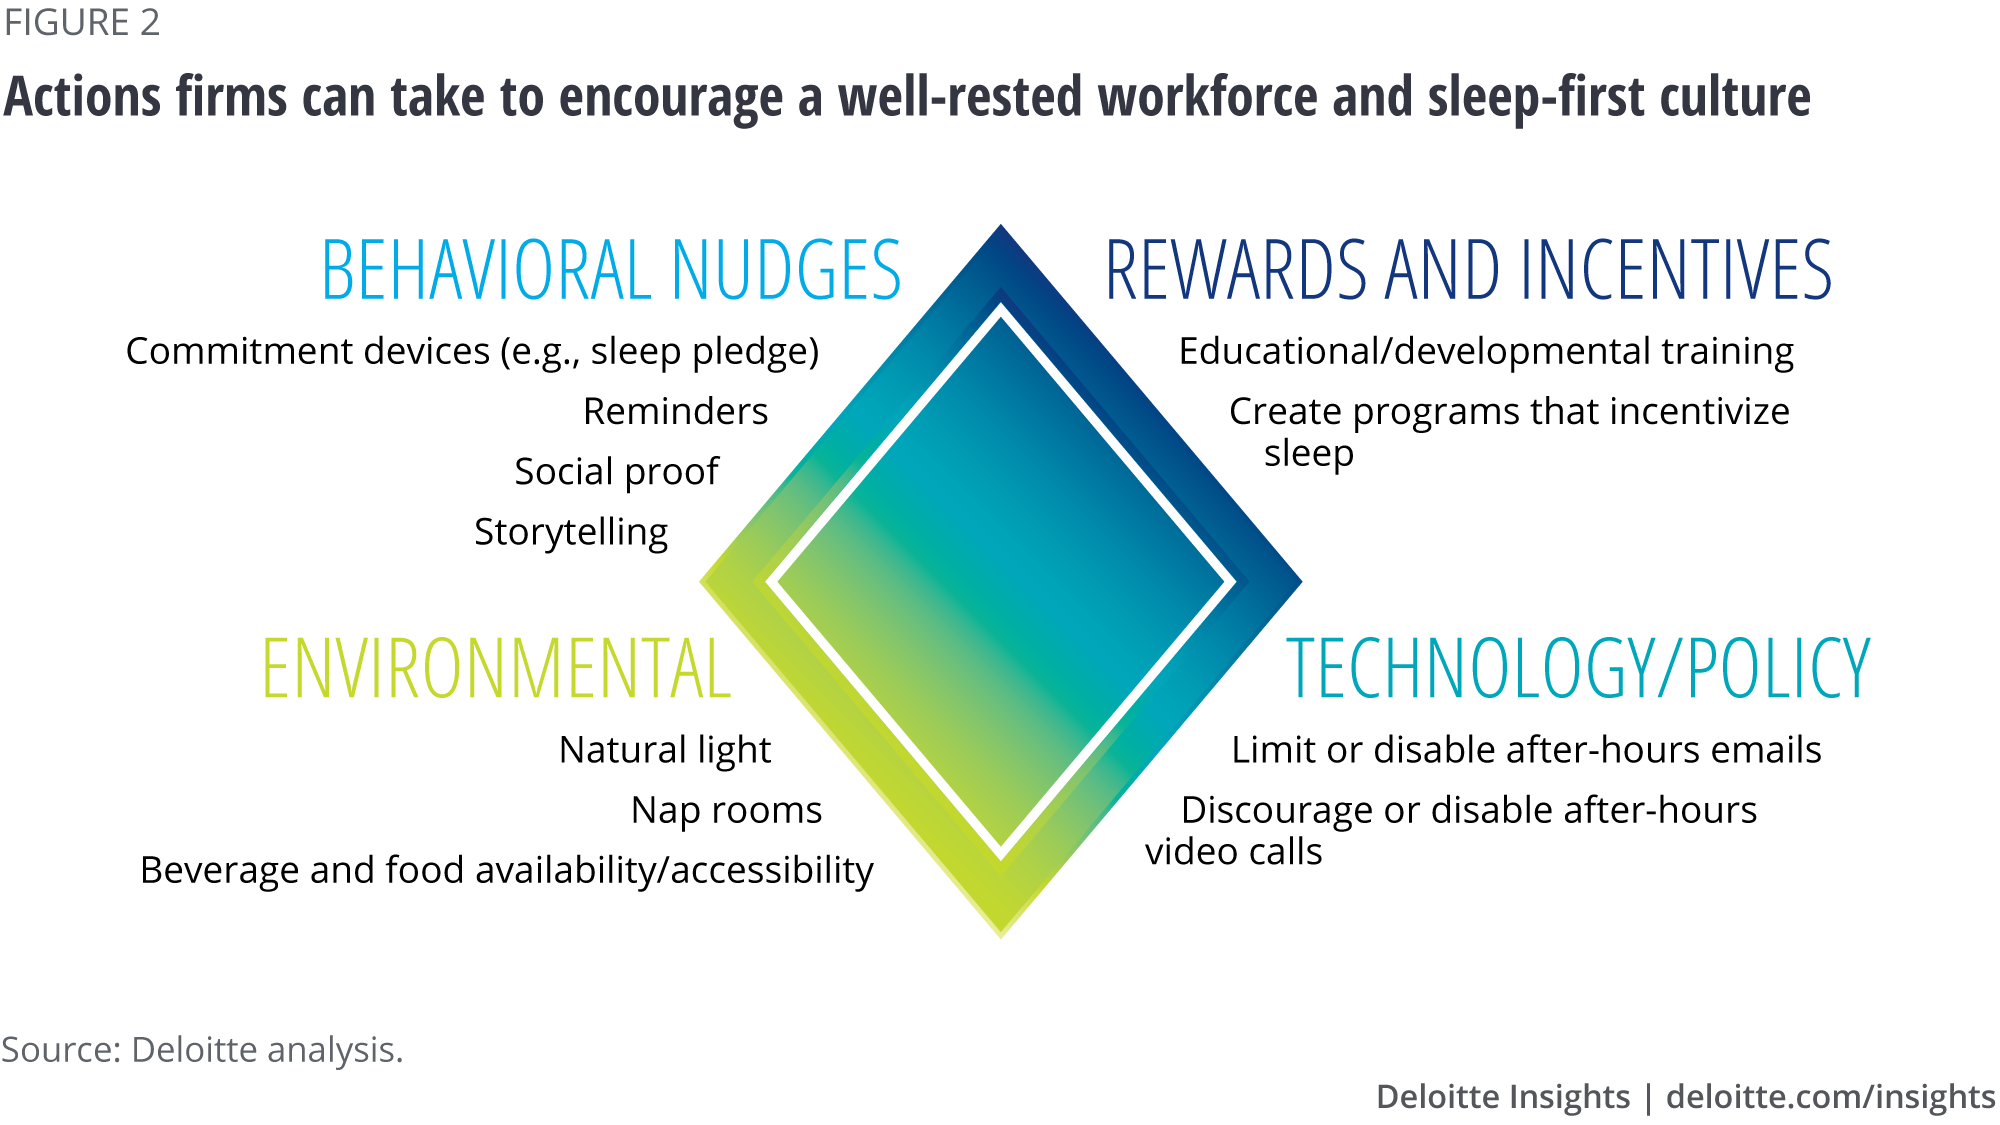 Actions firms can take to encourage a well-rested workforce and sleep-first culture